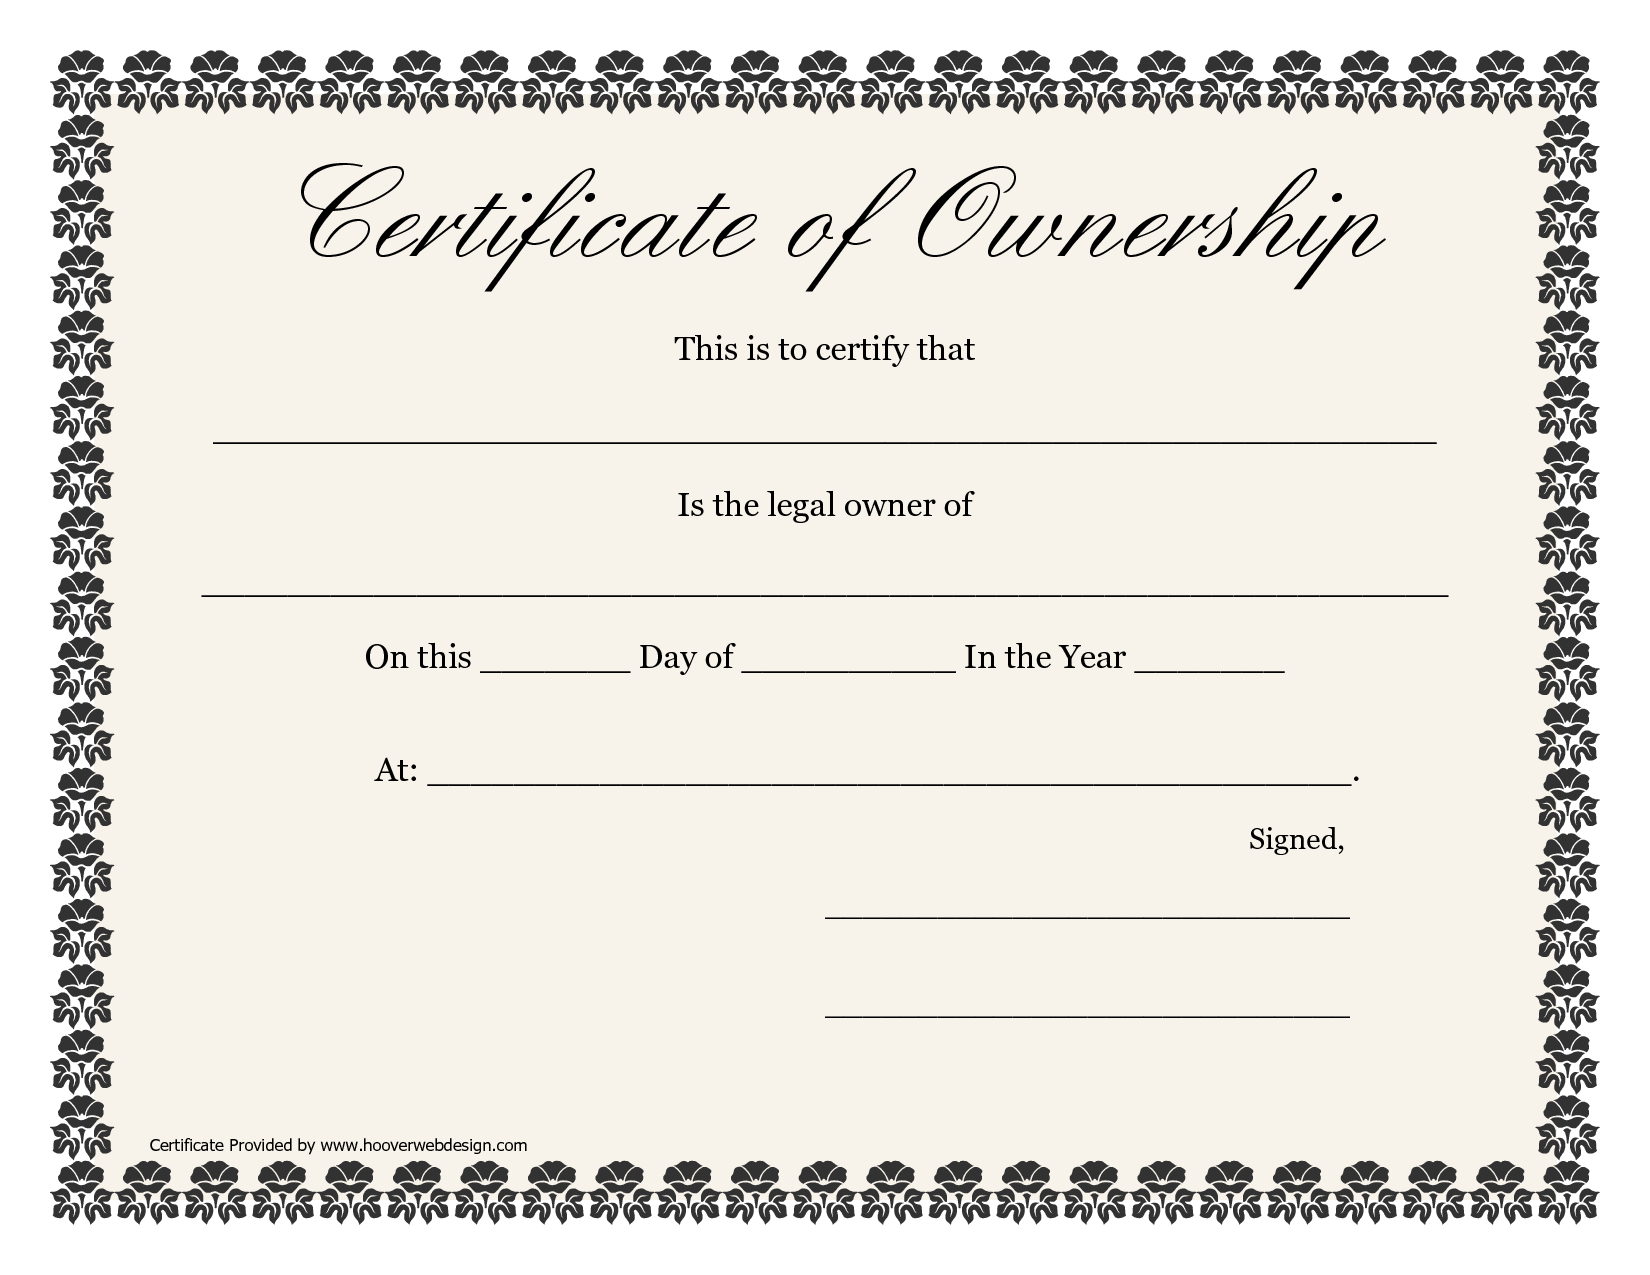 ❤️5+ Free Sample Of Certificate Of Ownership Form Template❤️ With Regard To Certificate Of Ownership Template